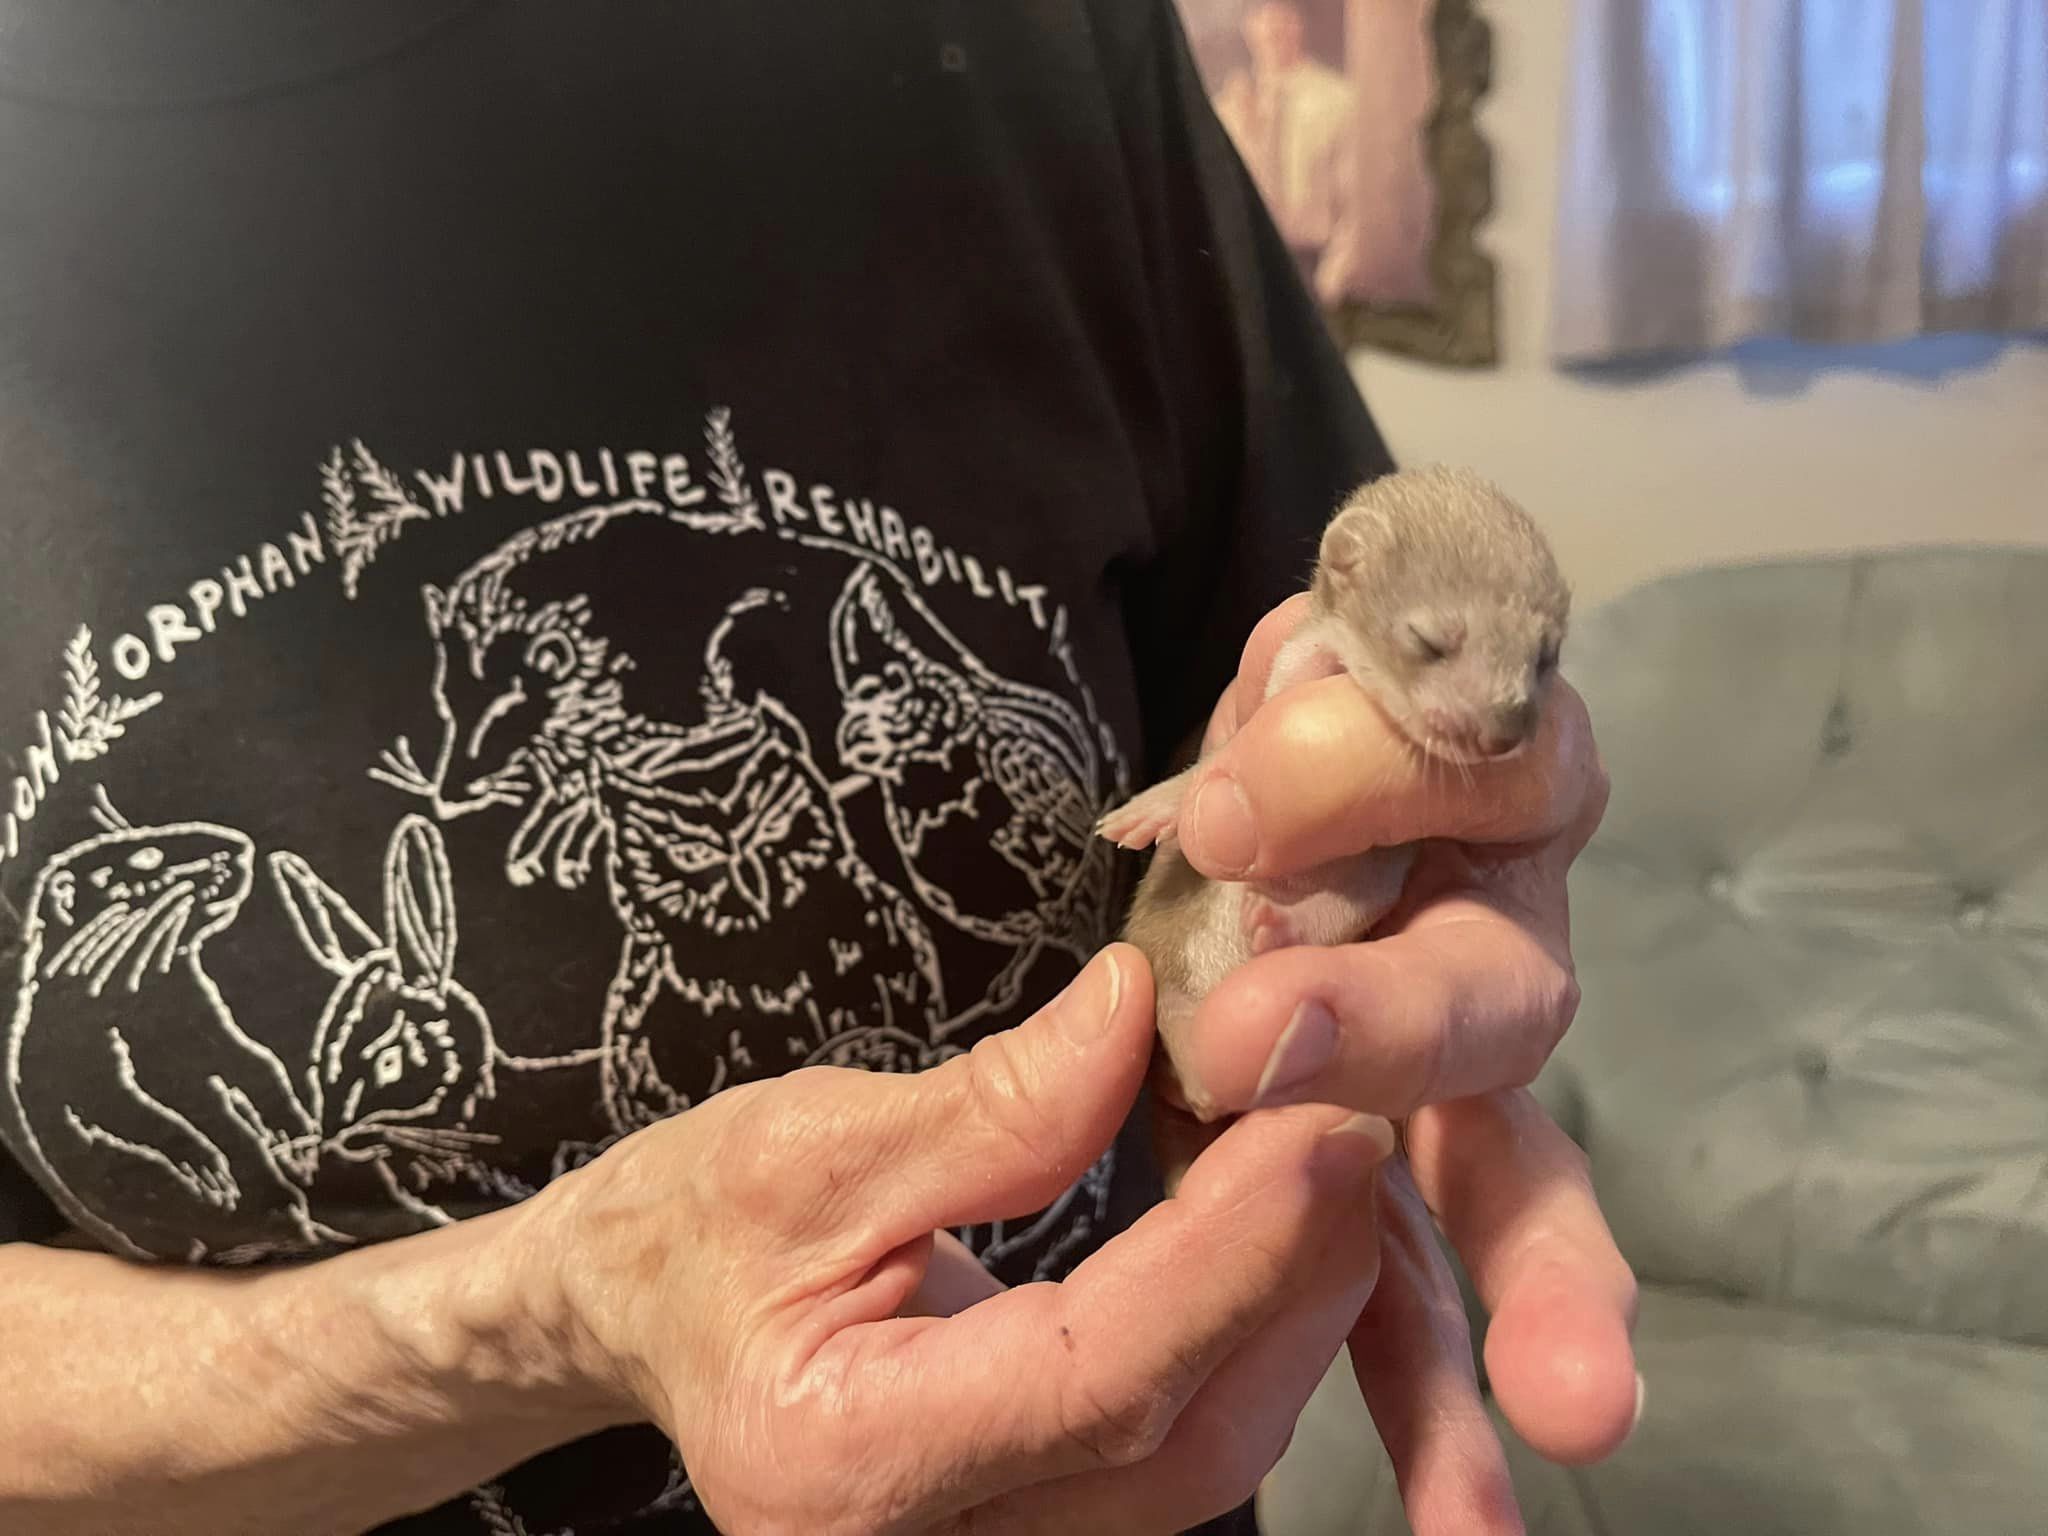 This weasel was brought in by a couple that found him in their drive covered in mud.